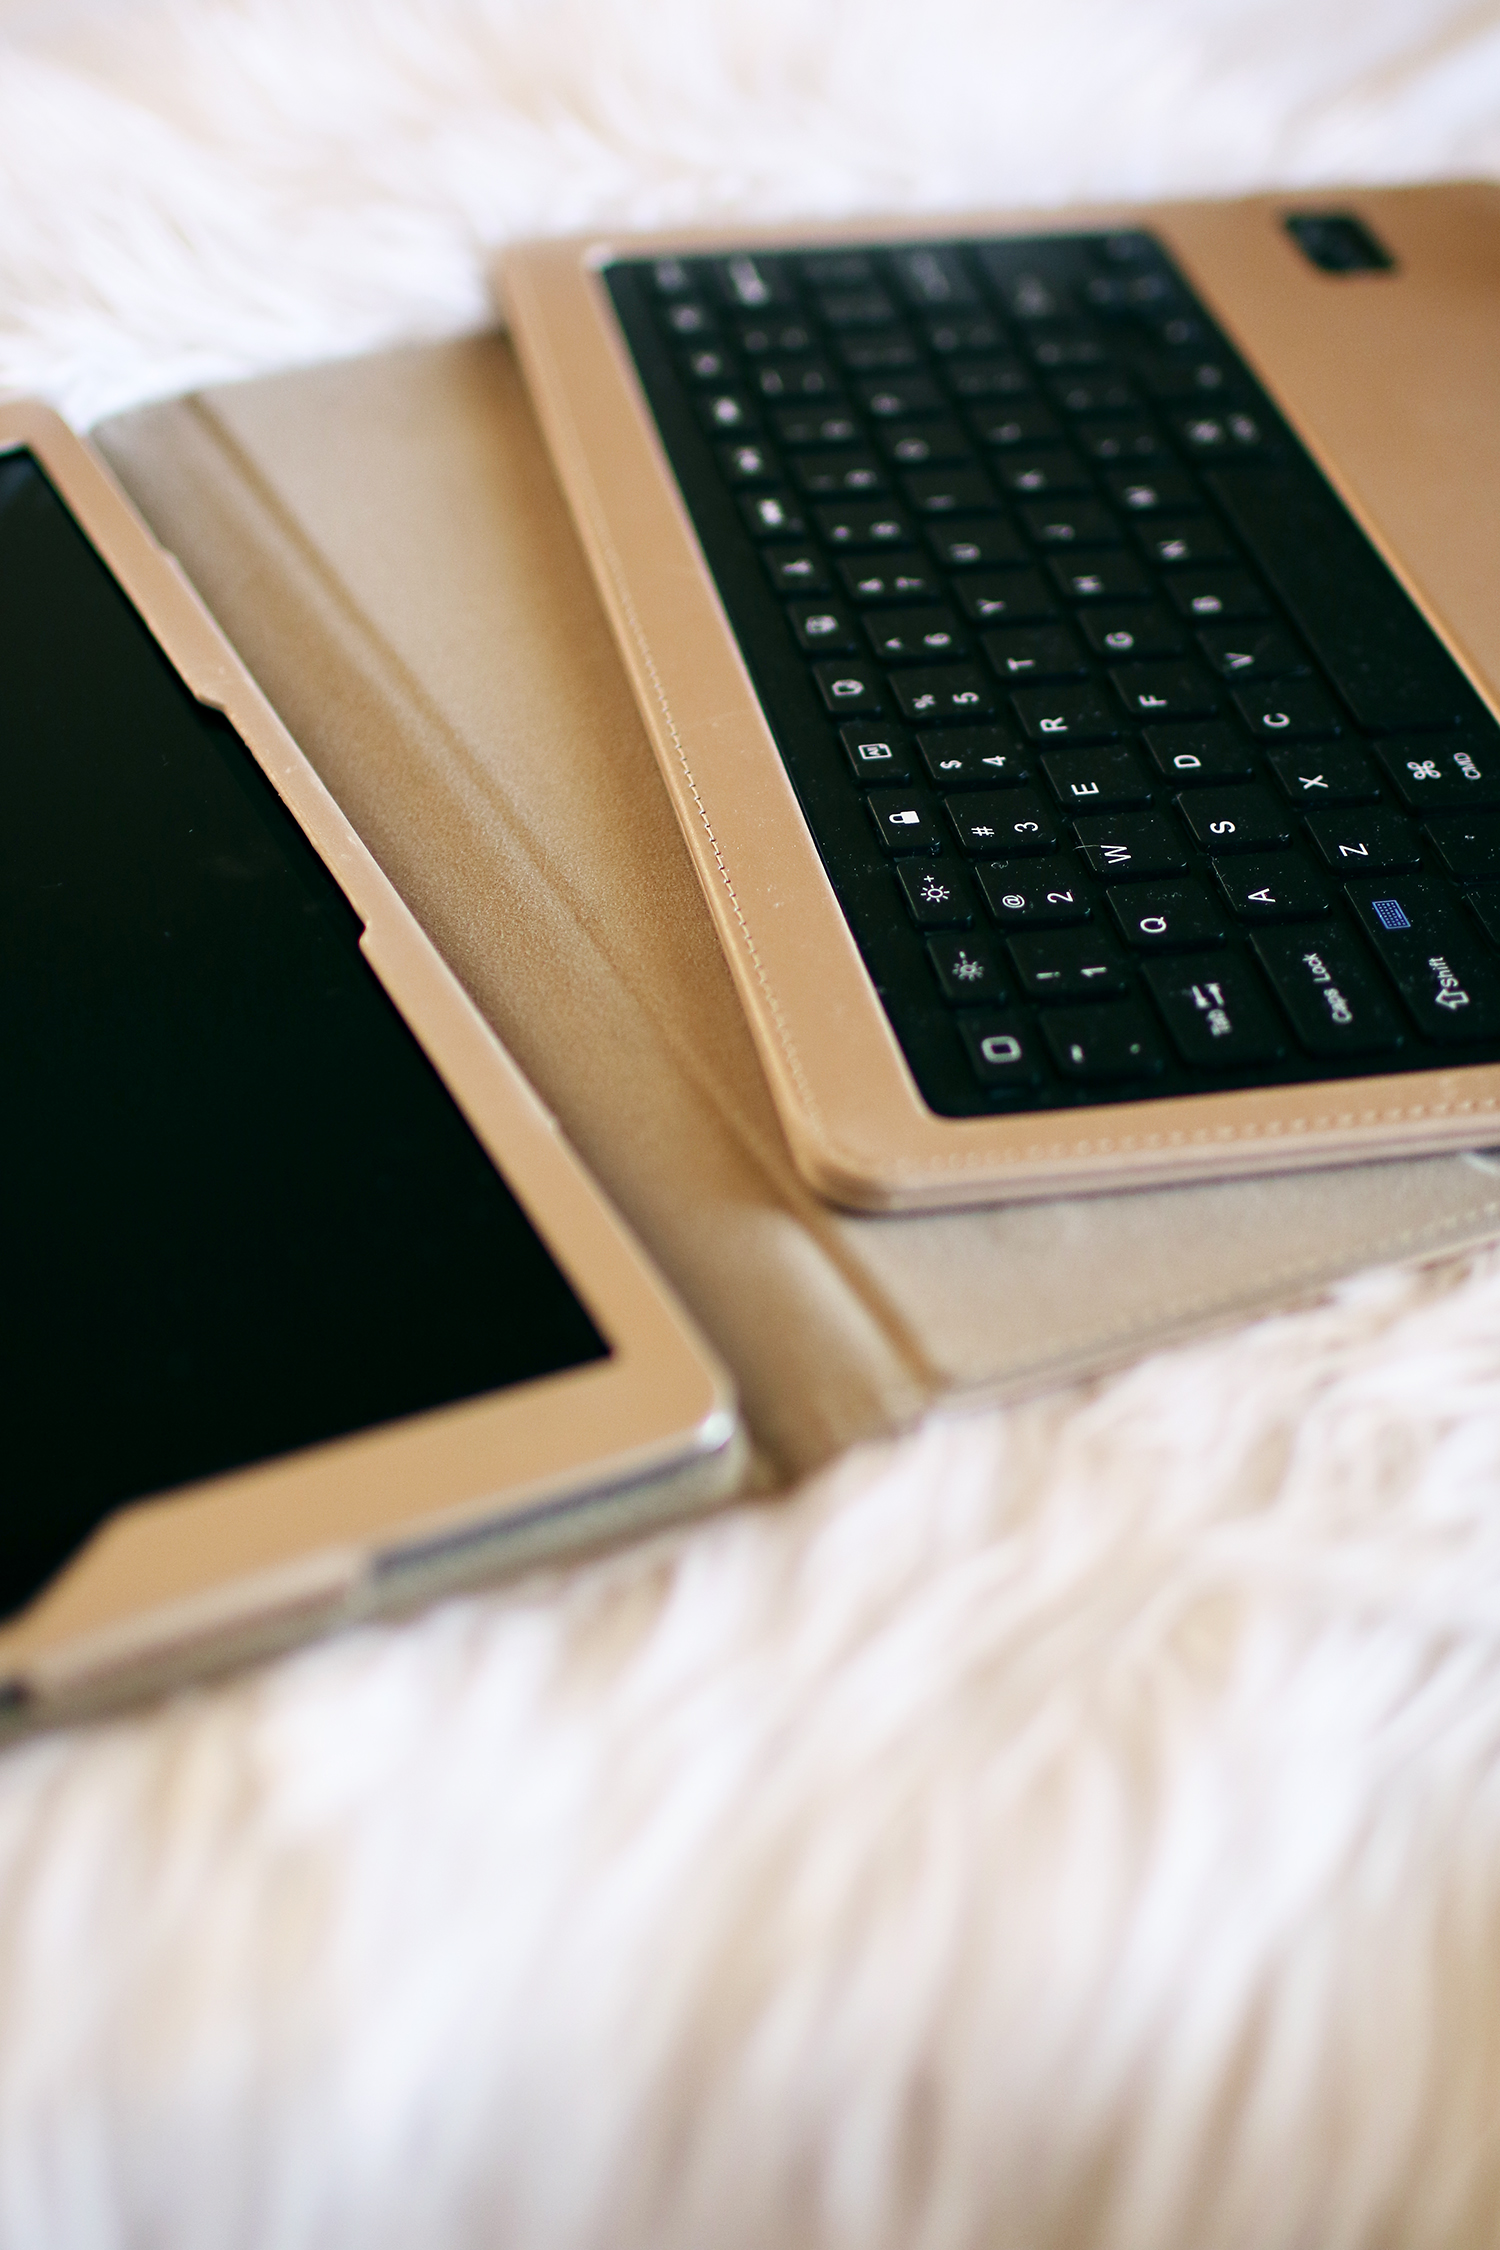 Another round of my latest finds and obsessions for the month of April and this time I am sharing all about my review of the iPad Pro and the accessories I found to be the perfect fit. Catch it all over on Haus of Layne! #iPadProReview #ApplePencil #Apple #TechReview